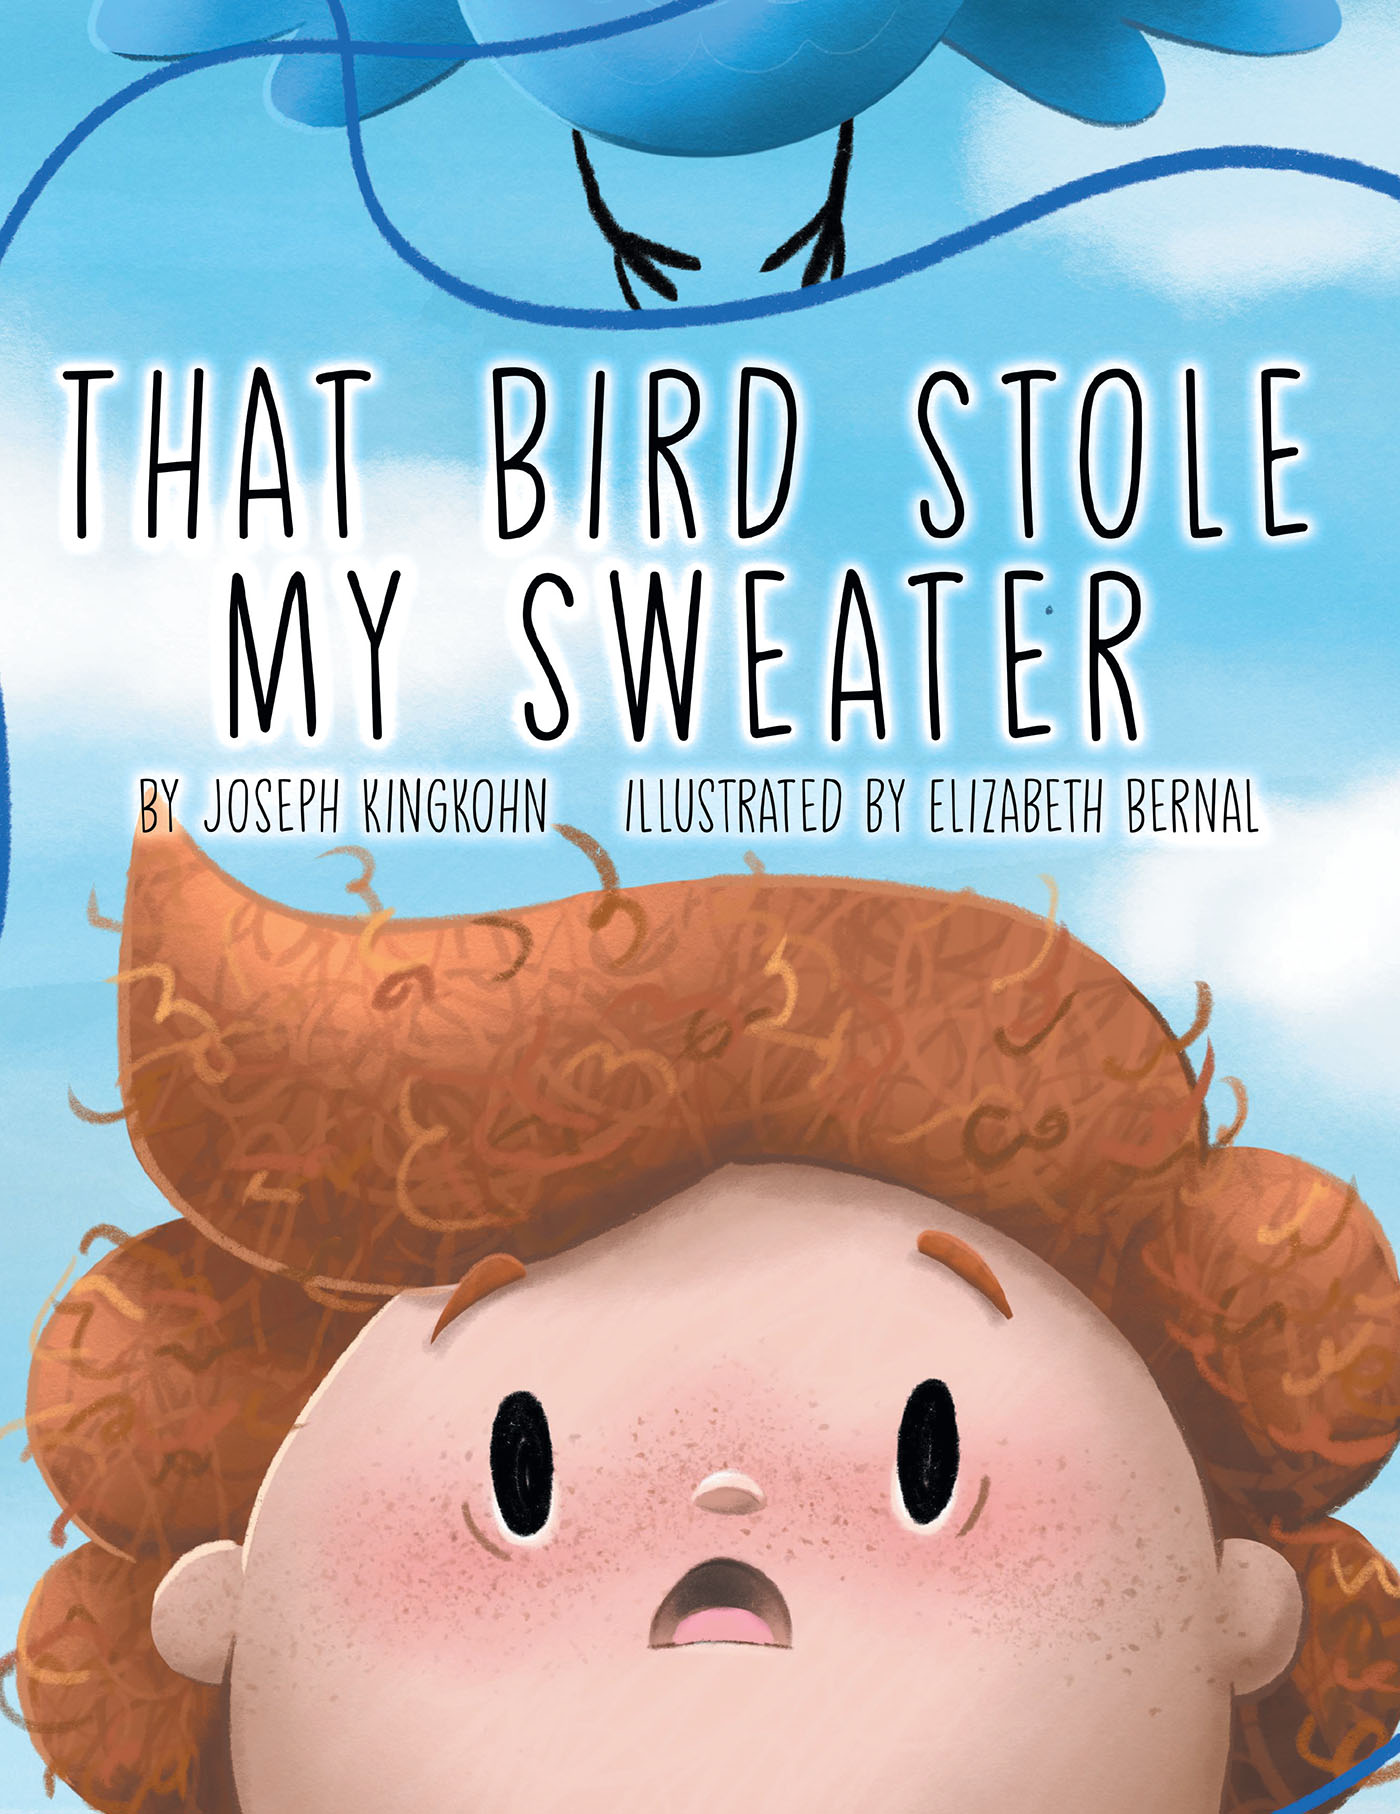 Joseph KingKohn’s Newly Released "That Bird Stole My Sweater" is a Fun Story of an Unexpected Meeting with a Little Bird